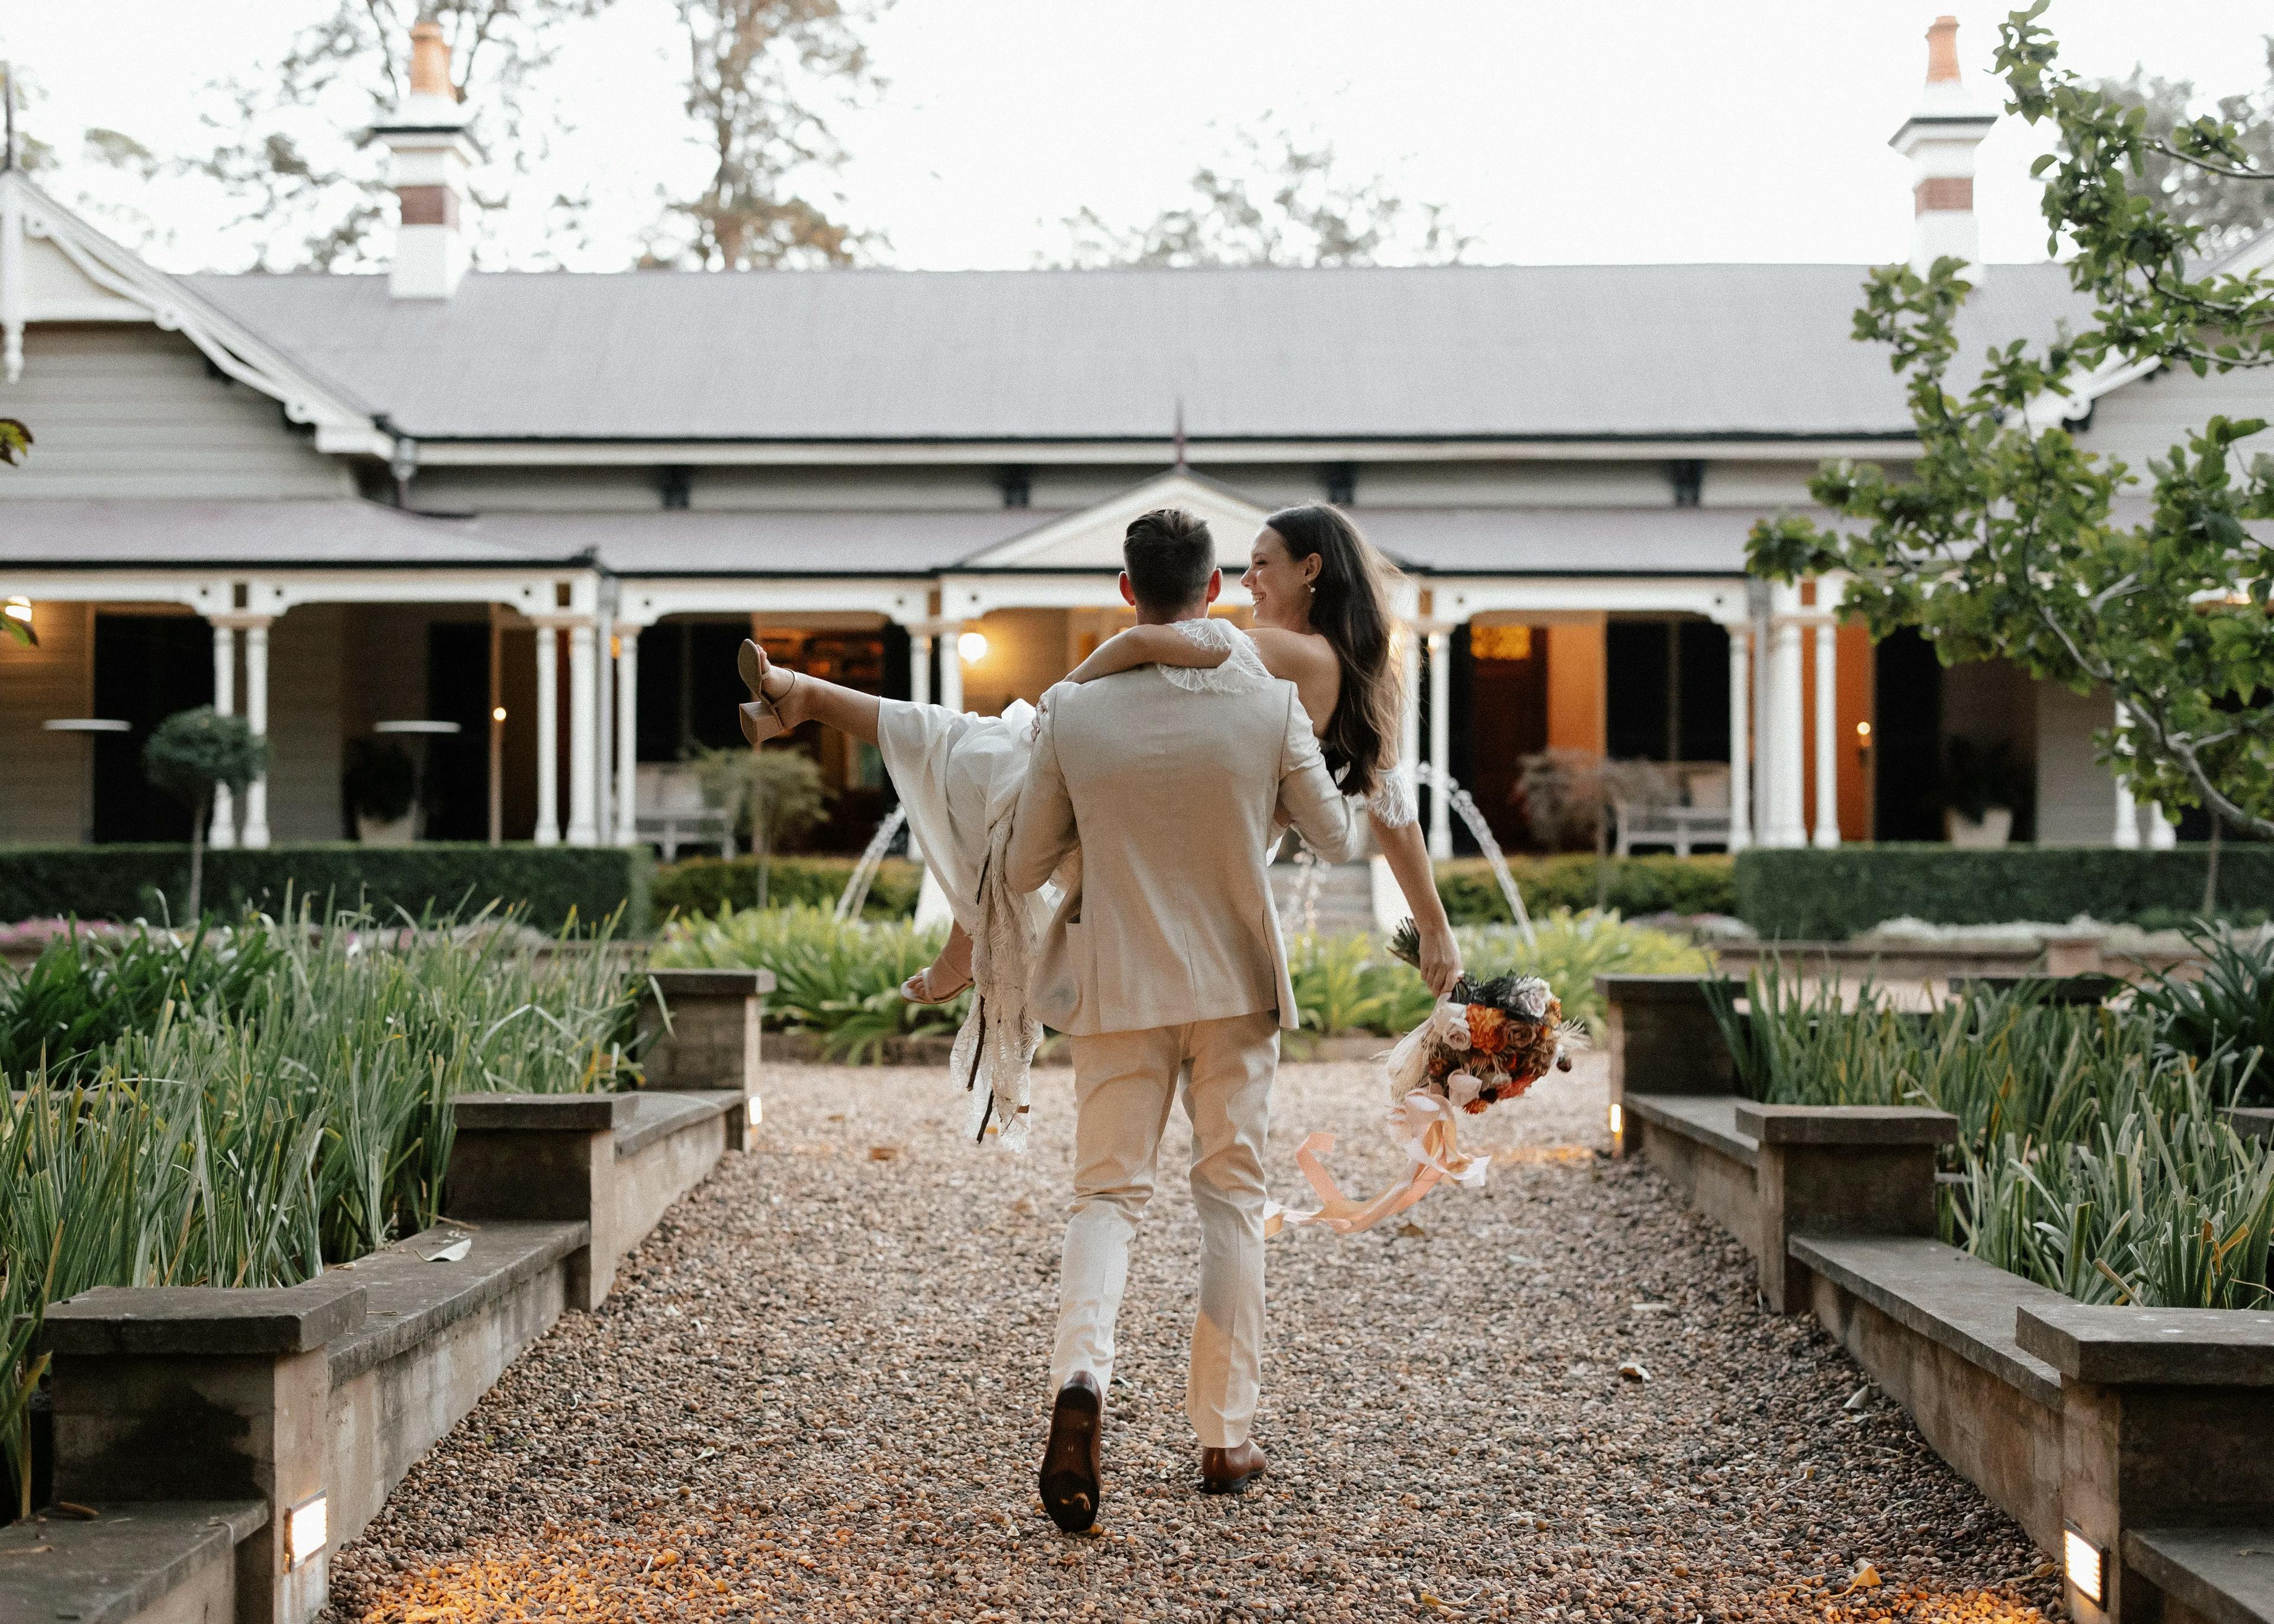 A groom carrying his bride in front of an elegant, rustic building with a garden. He is walking on a gravel path, both dressed in wedding attire; the bride holding a large bouquet of flowers. The background showcases lush greenery and a charming wooden facade.